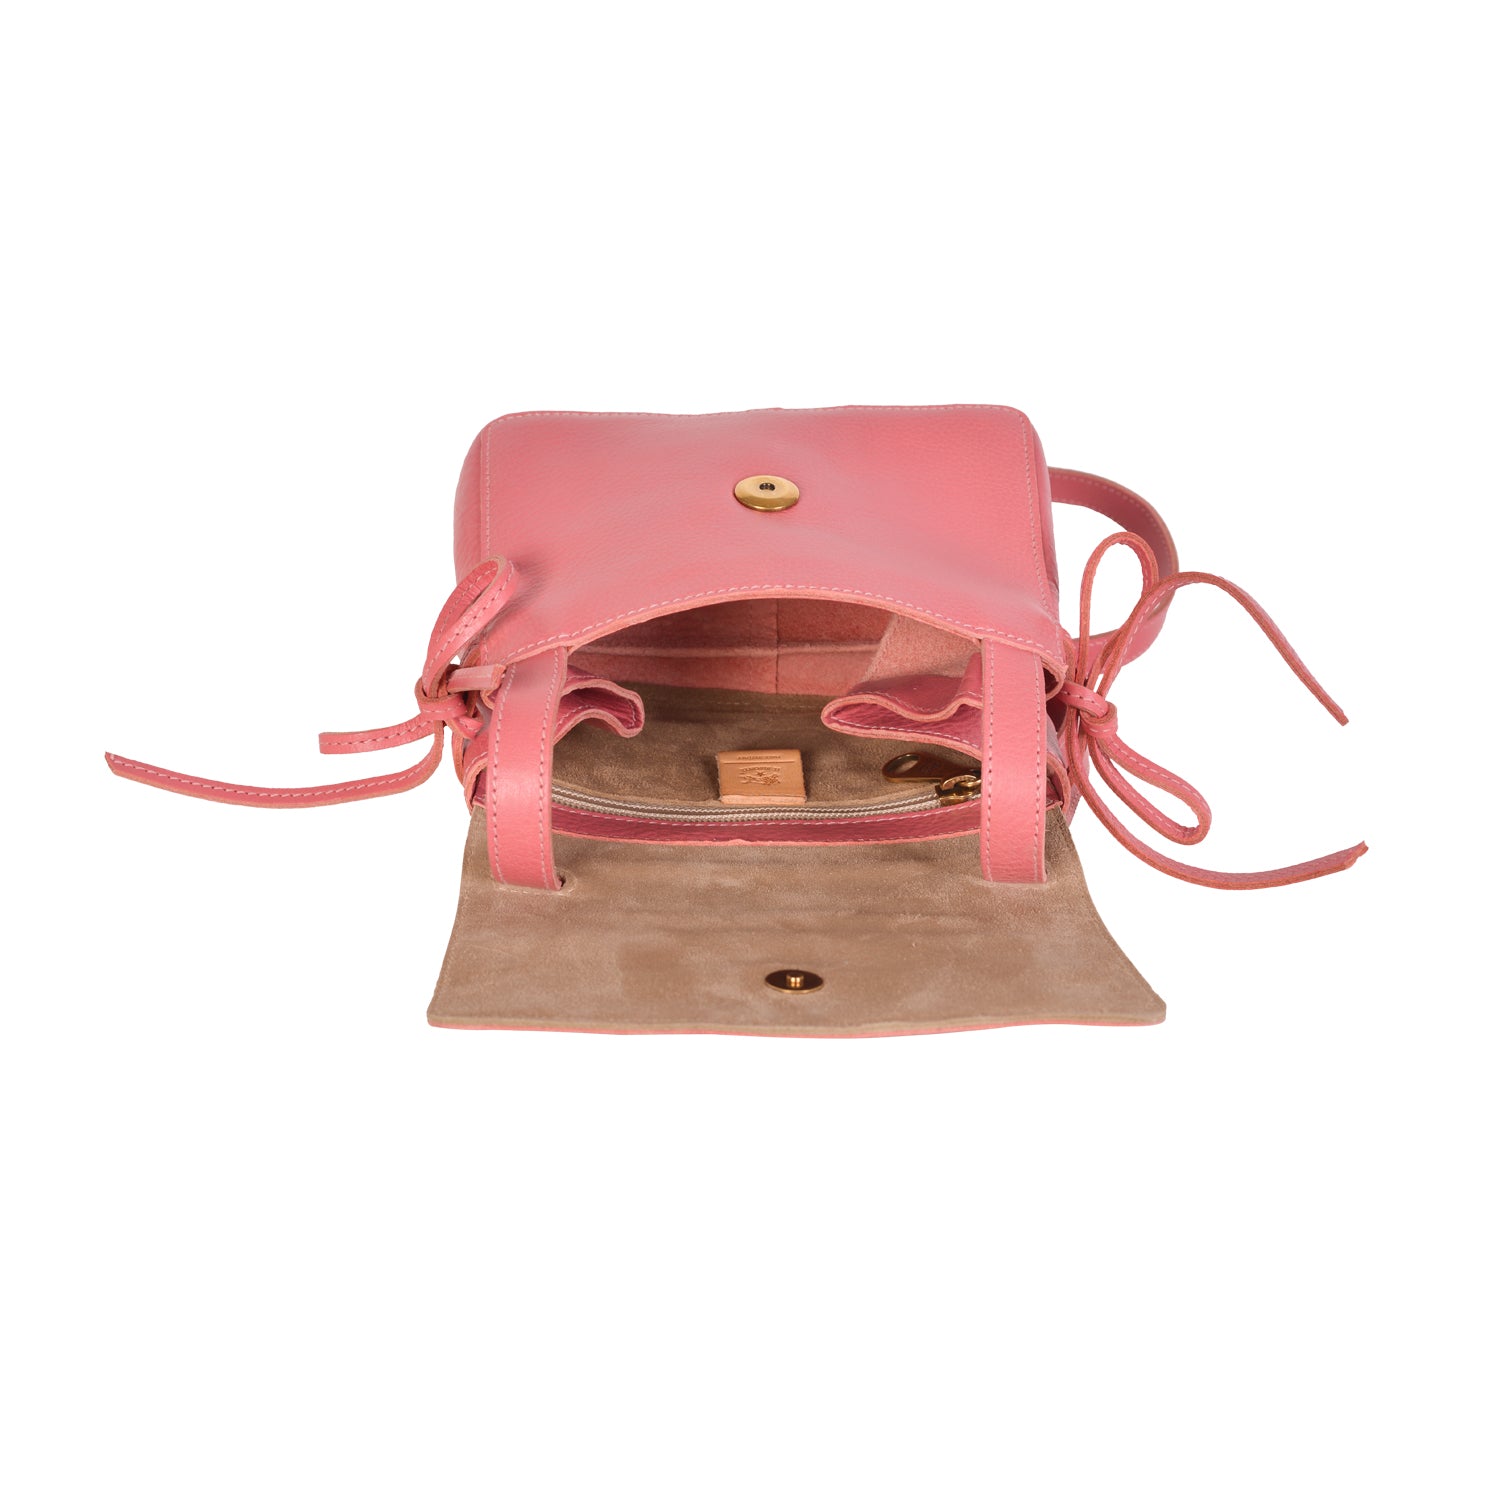 NEW IL BISONTE WOMEN'S SOFFIETTO COLLECTION CROSSBODY BAG IN PINK LEATHER